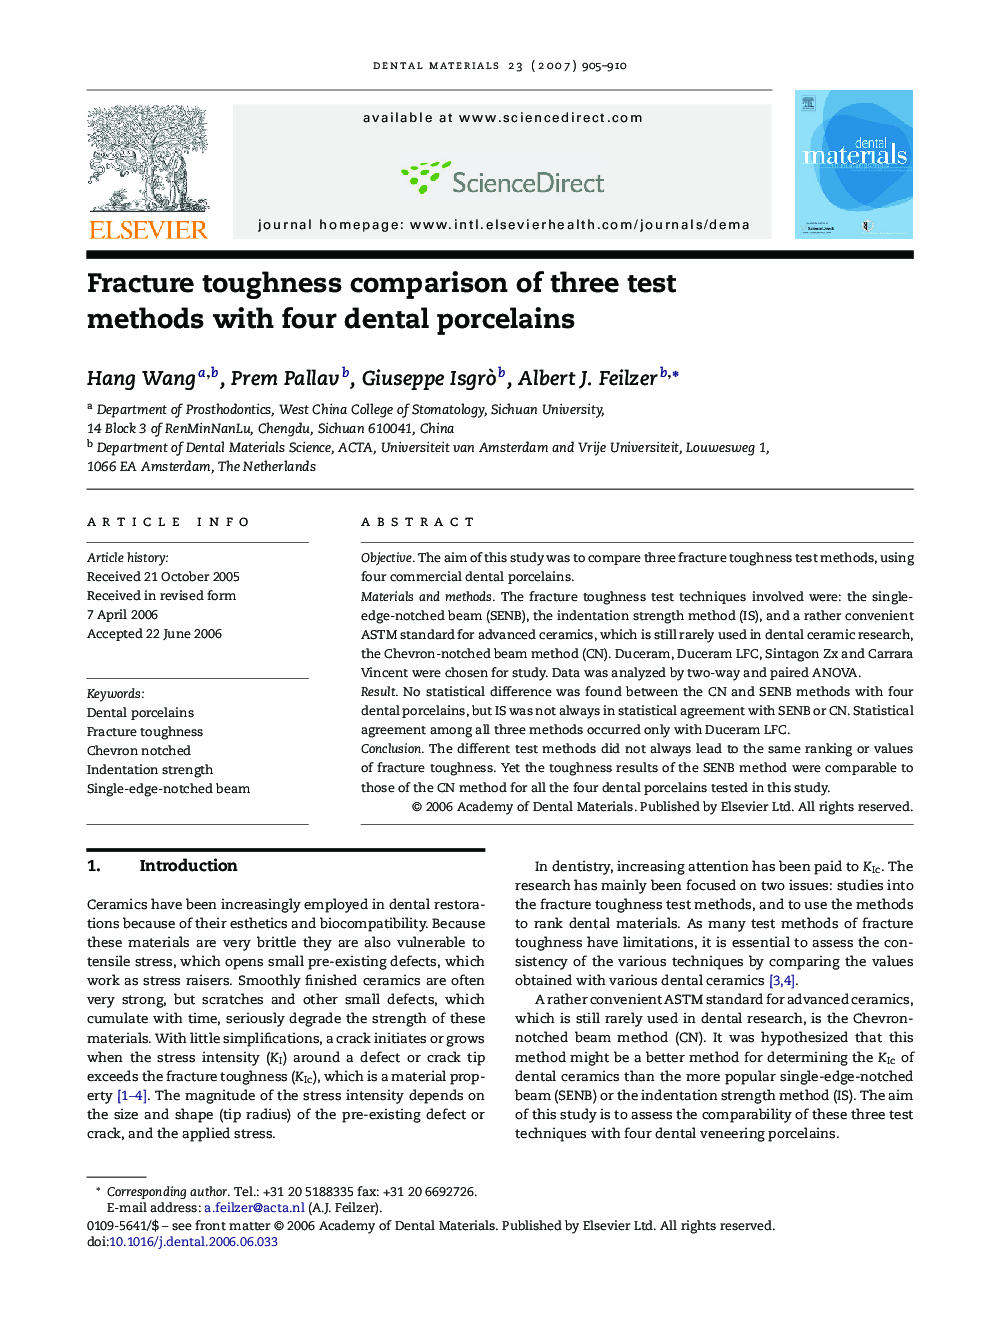 Fracture toughness comparison of three test methods with four dental porcelains